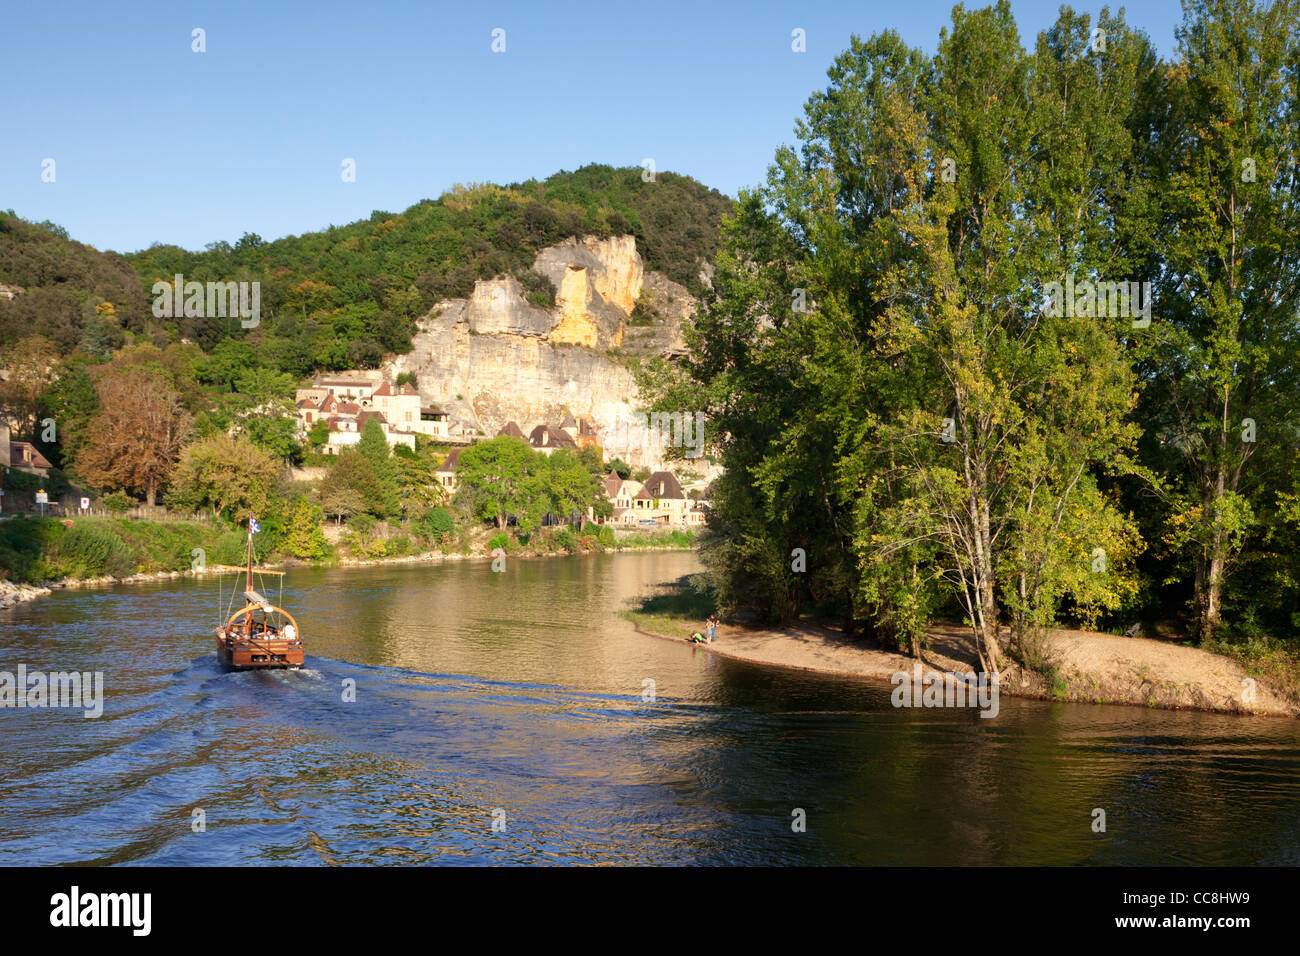 Late afternoon light on the River Dordogne, Aquitaine, France, as a gabarre, or river boat, approaches La Roque-Gageac. Stock Photo